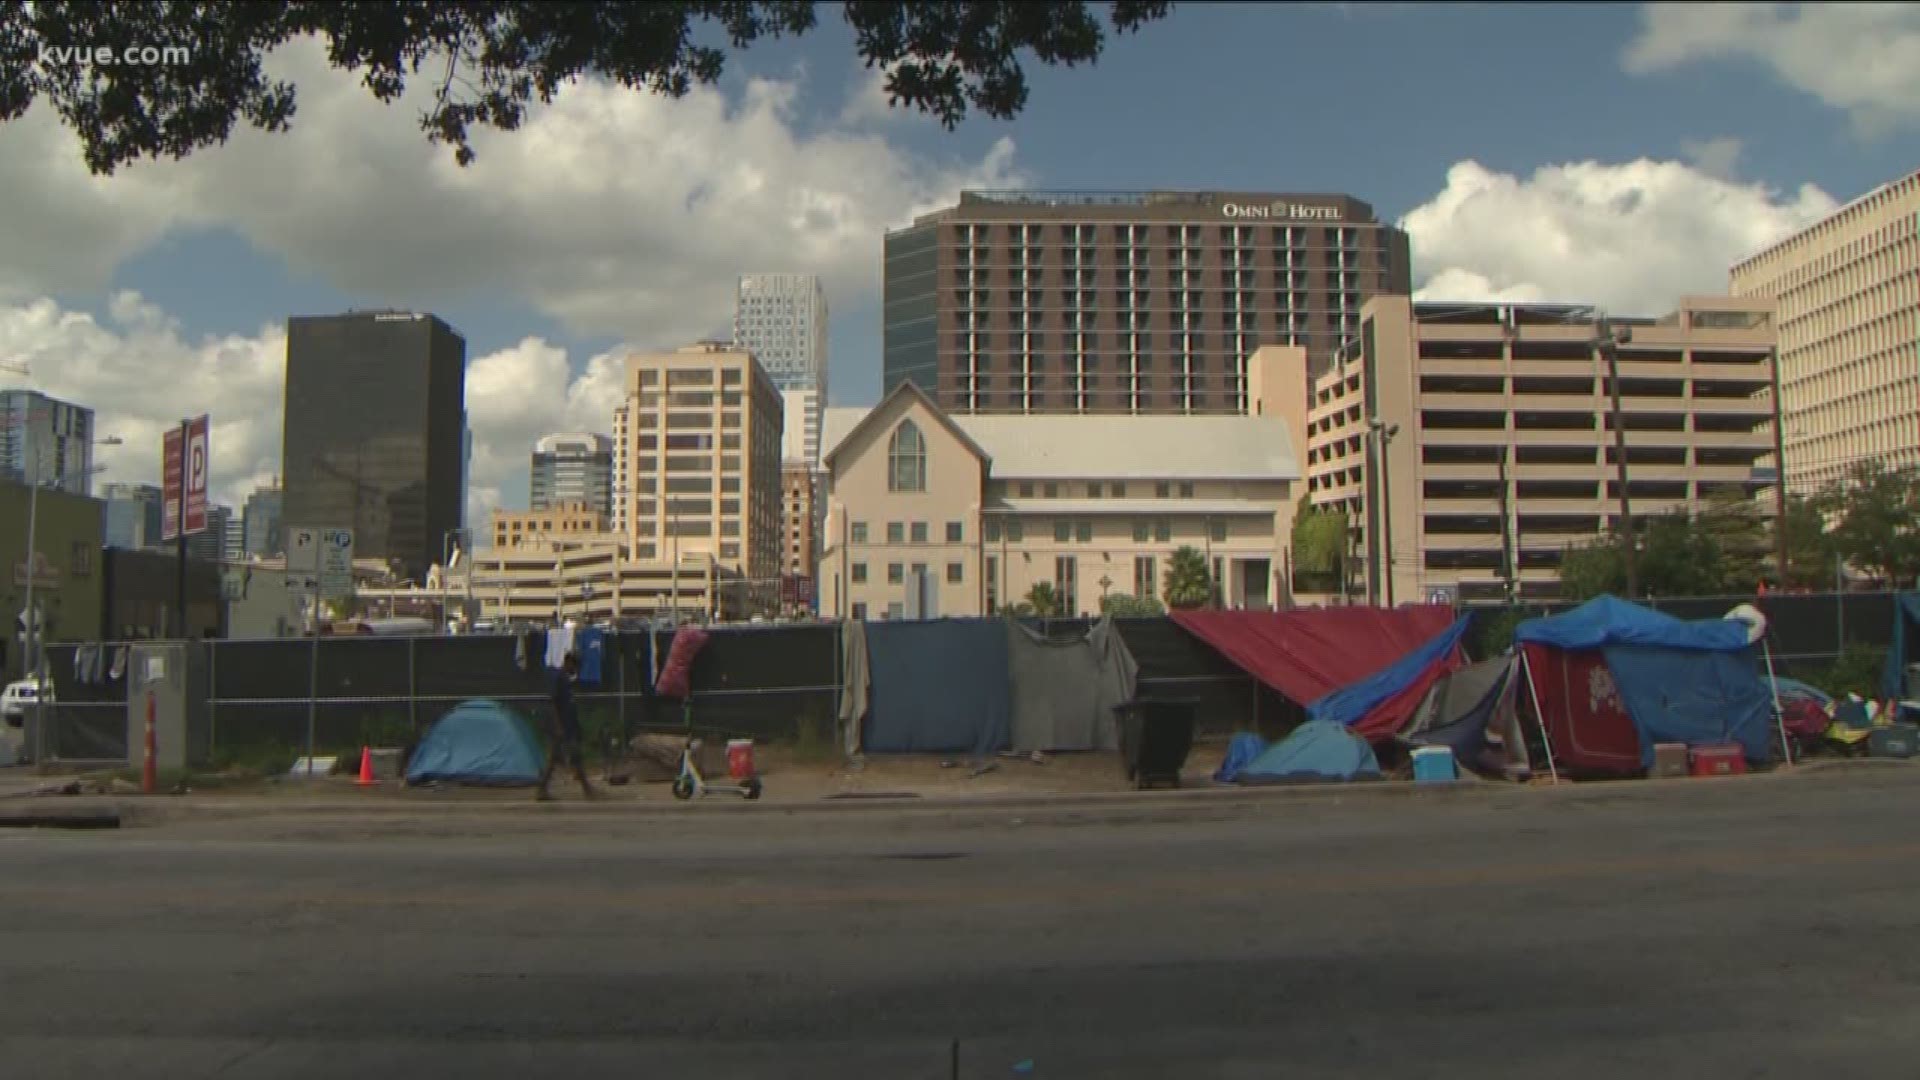 In a letter to Adler, Gov. Abbott said if the City doesn't act on the homeless situation by Nov. 1, the State will intervene.